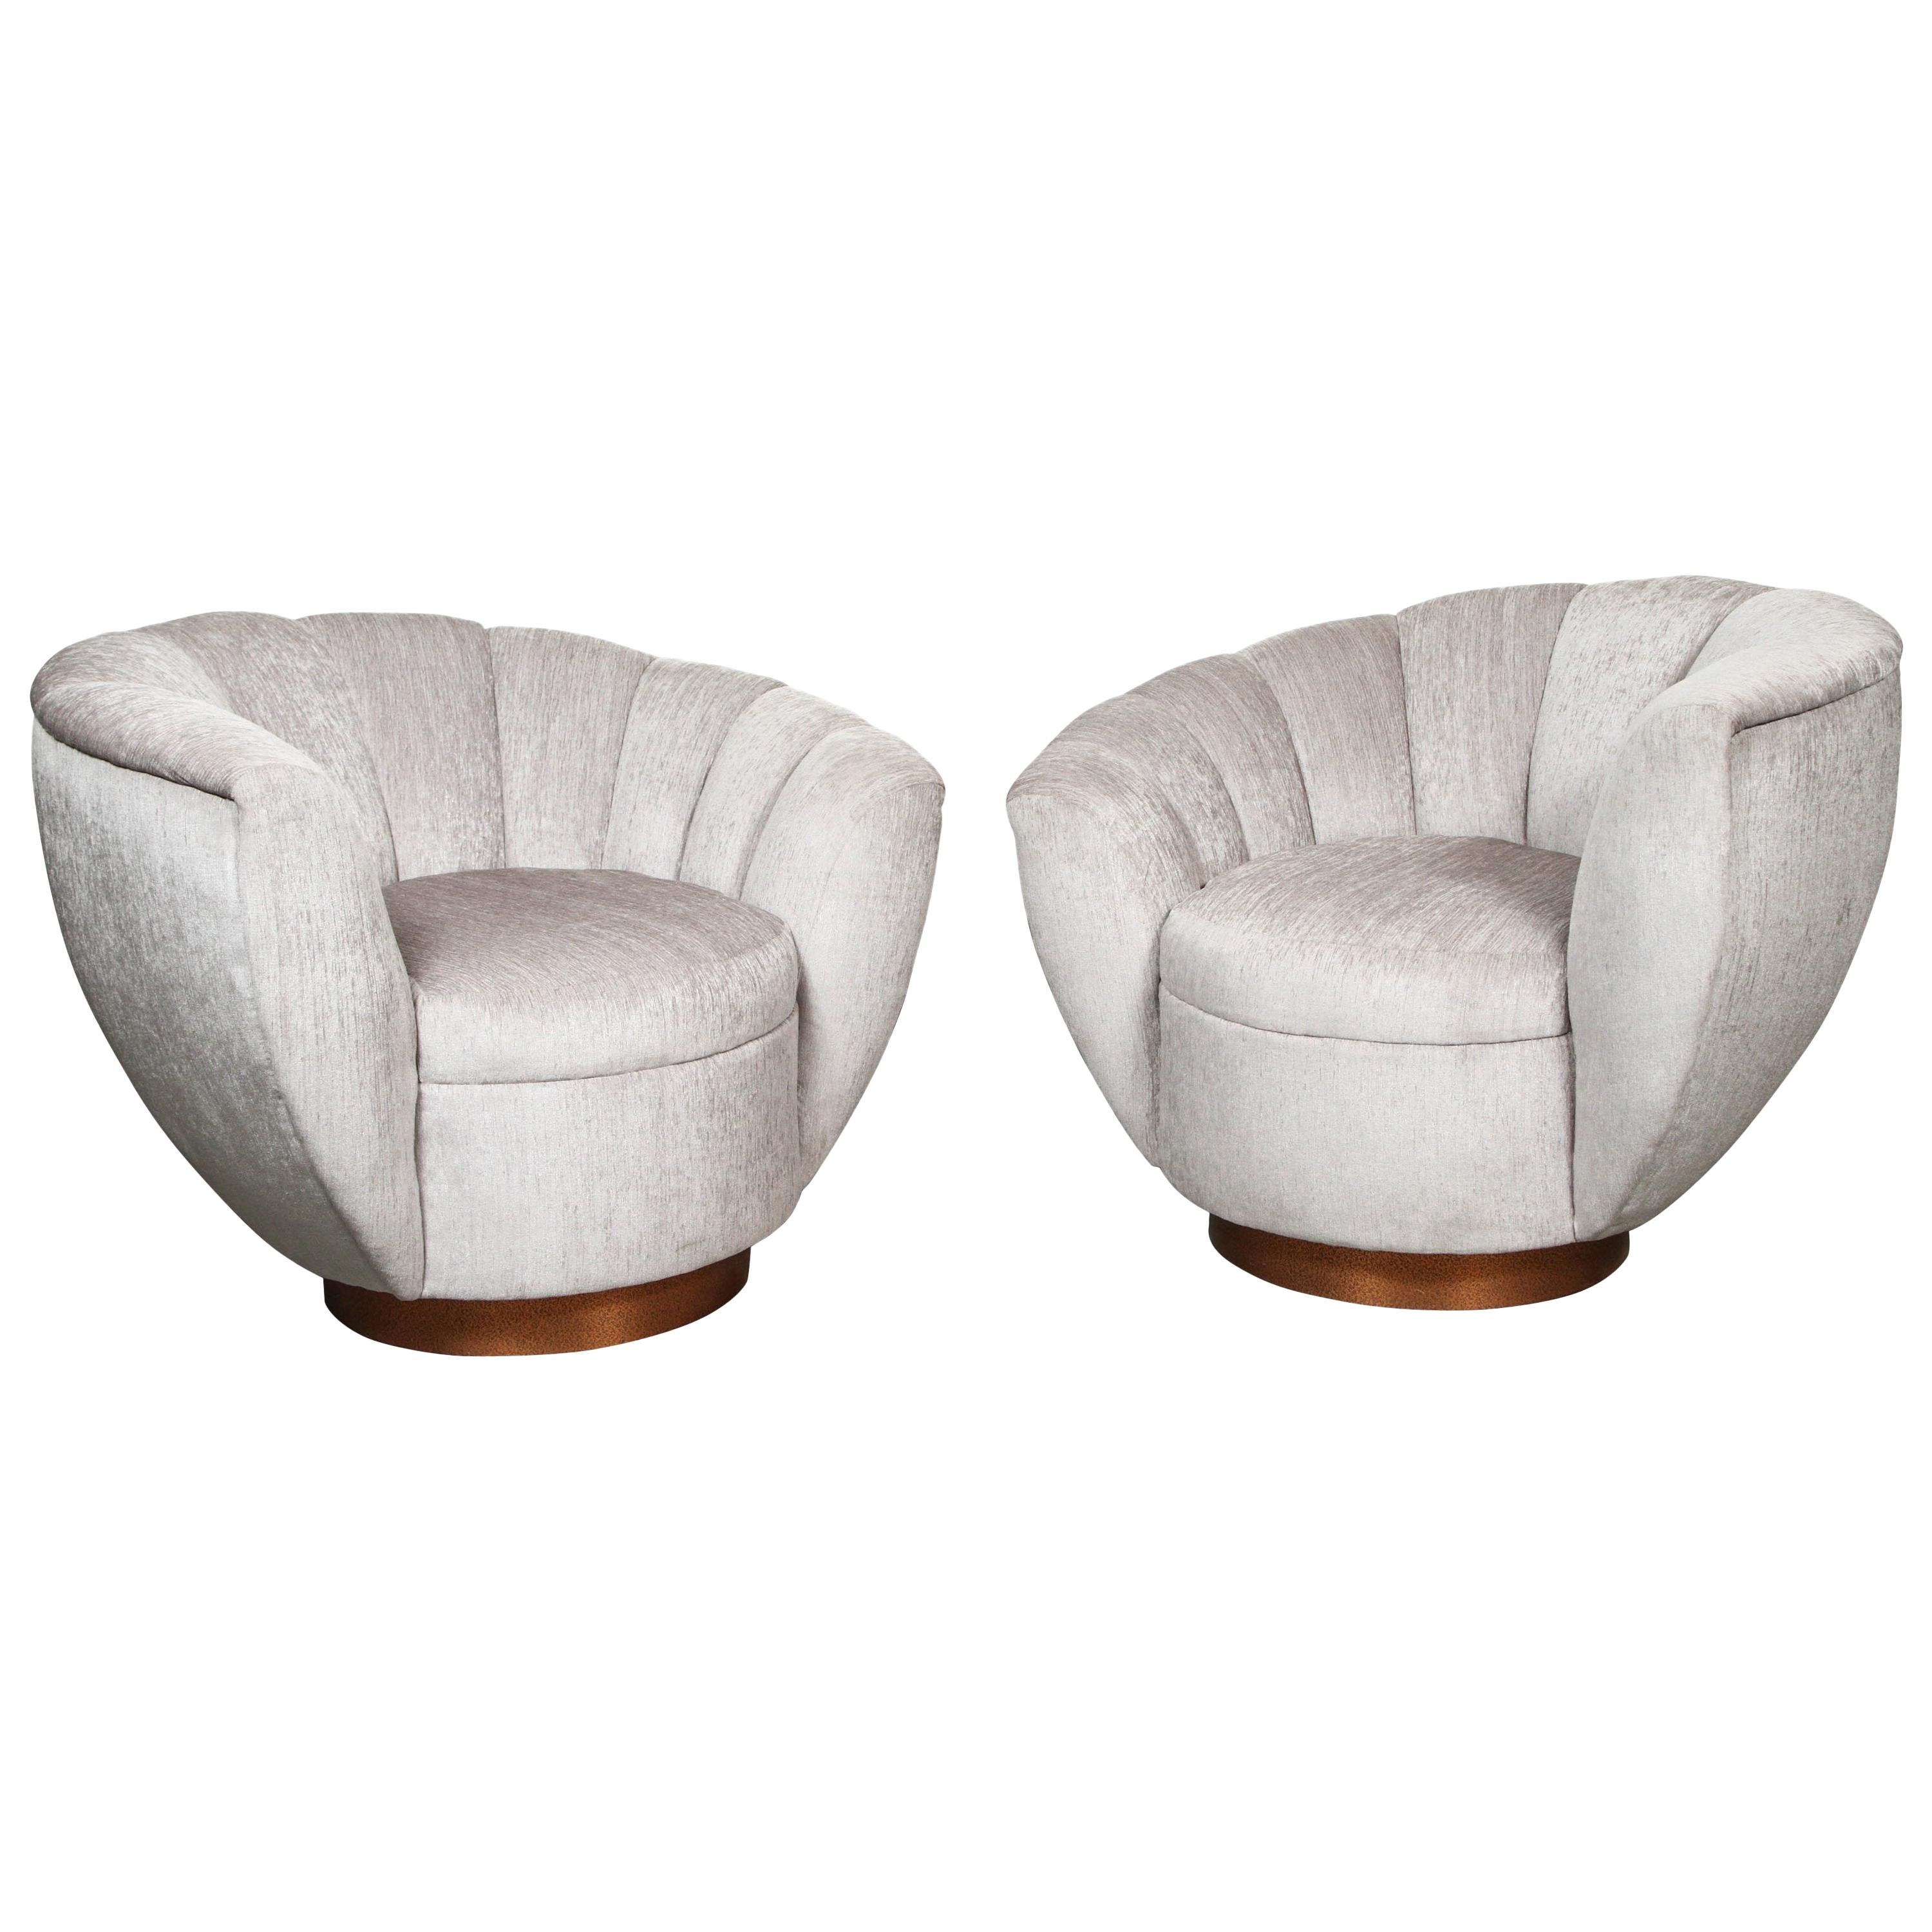 Pair of Elegant Channel Back Club Chairs